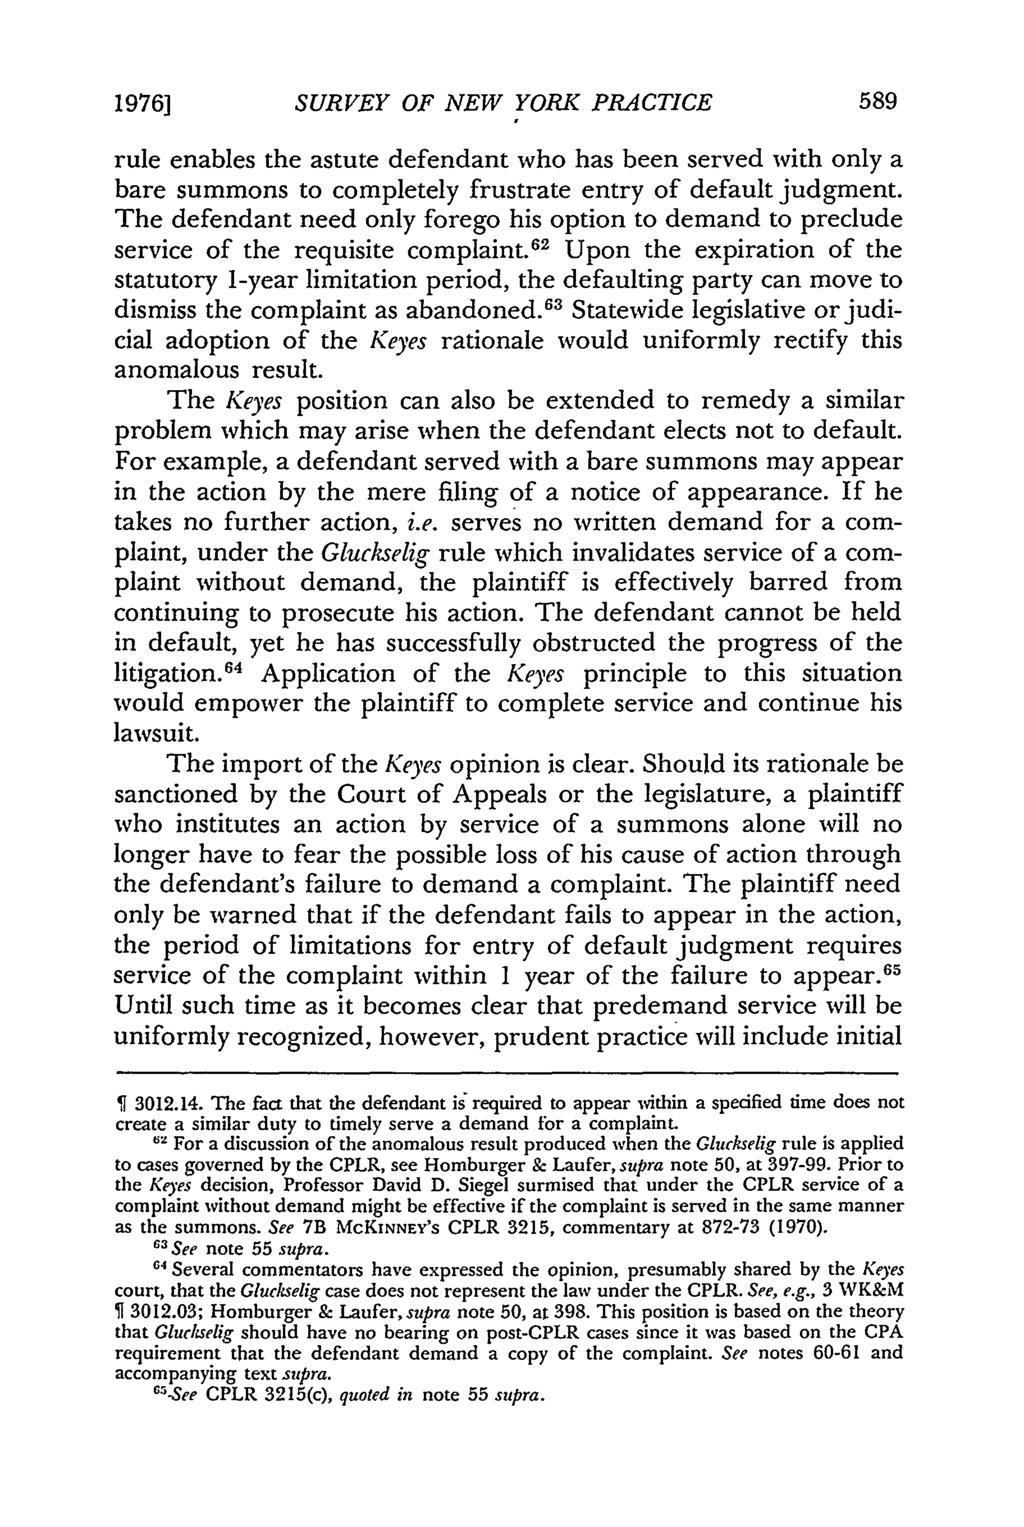 1976] SURVEY OF NEW YORK PRACTICE rule enables the astute defendant who has been served with only a bare summons to completely frustrate entry of default judgment.